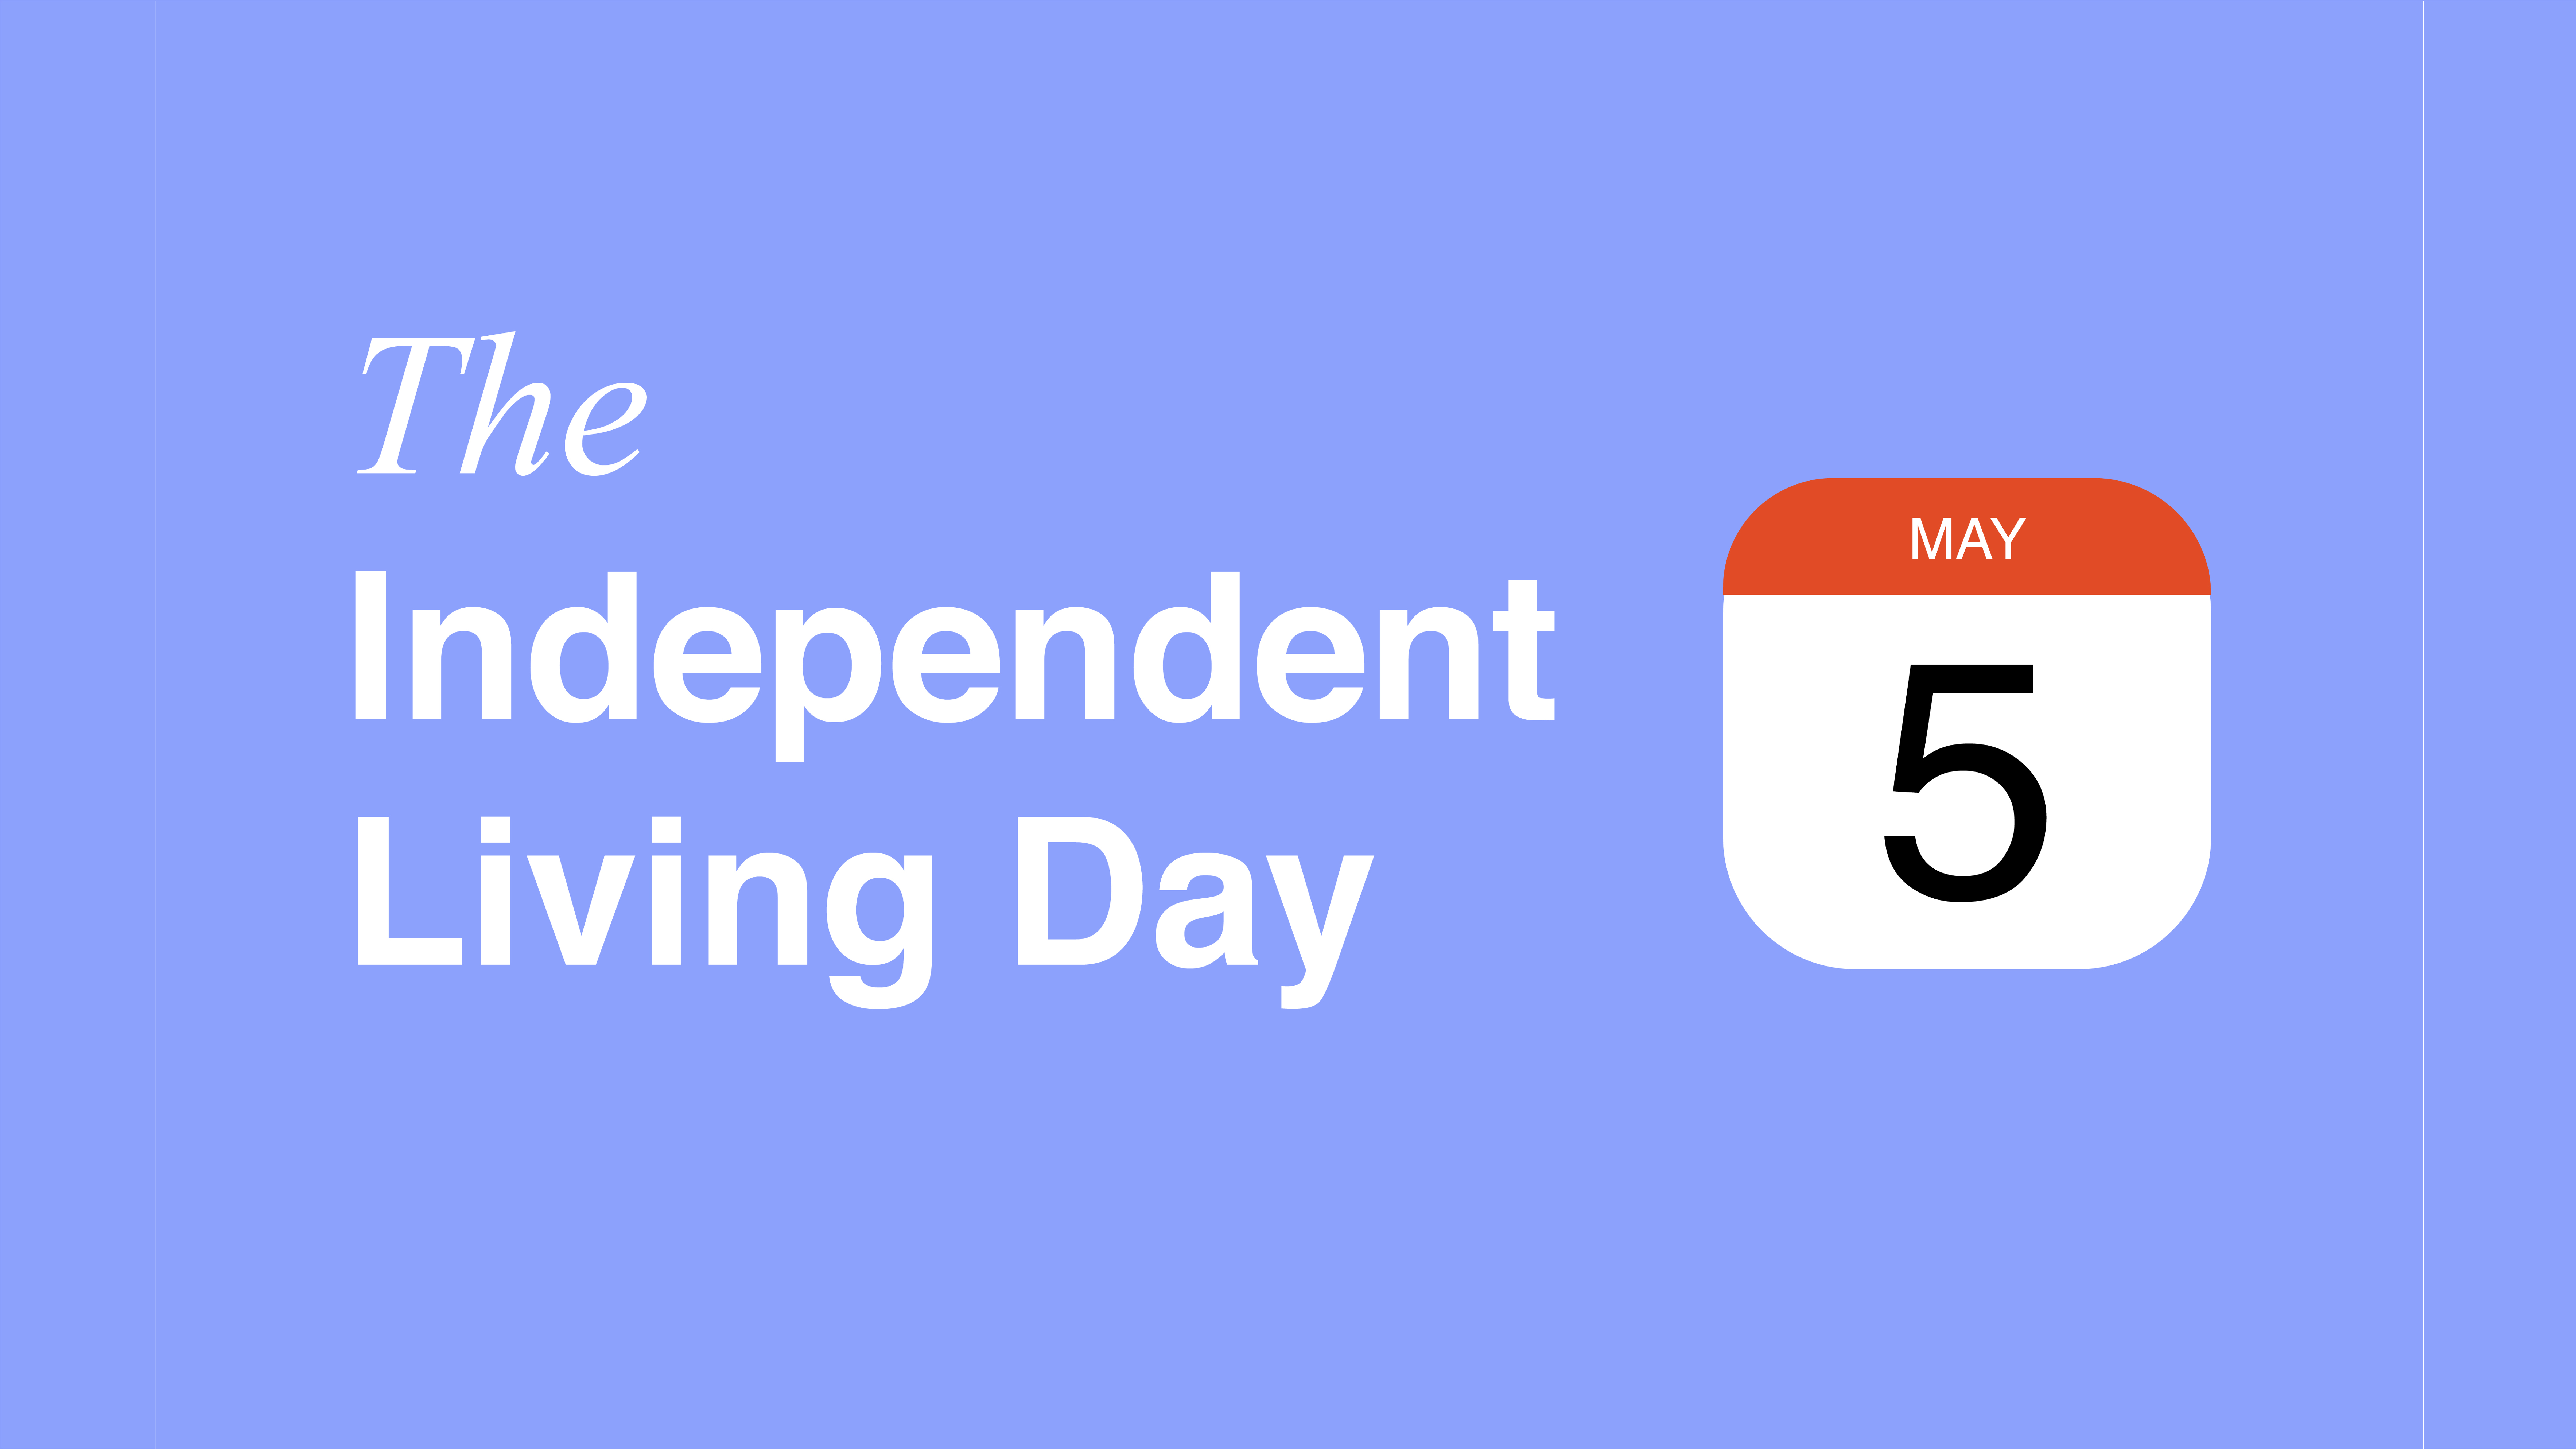 Get Ready for the 9th Edition of the Independent Living Day!